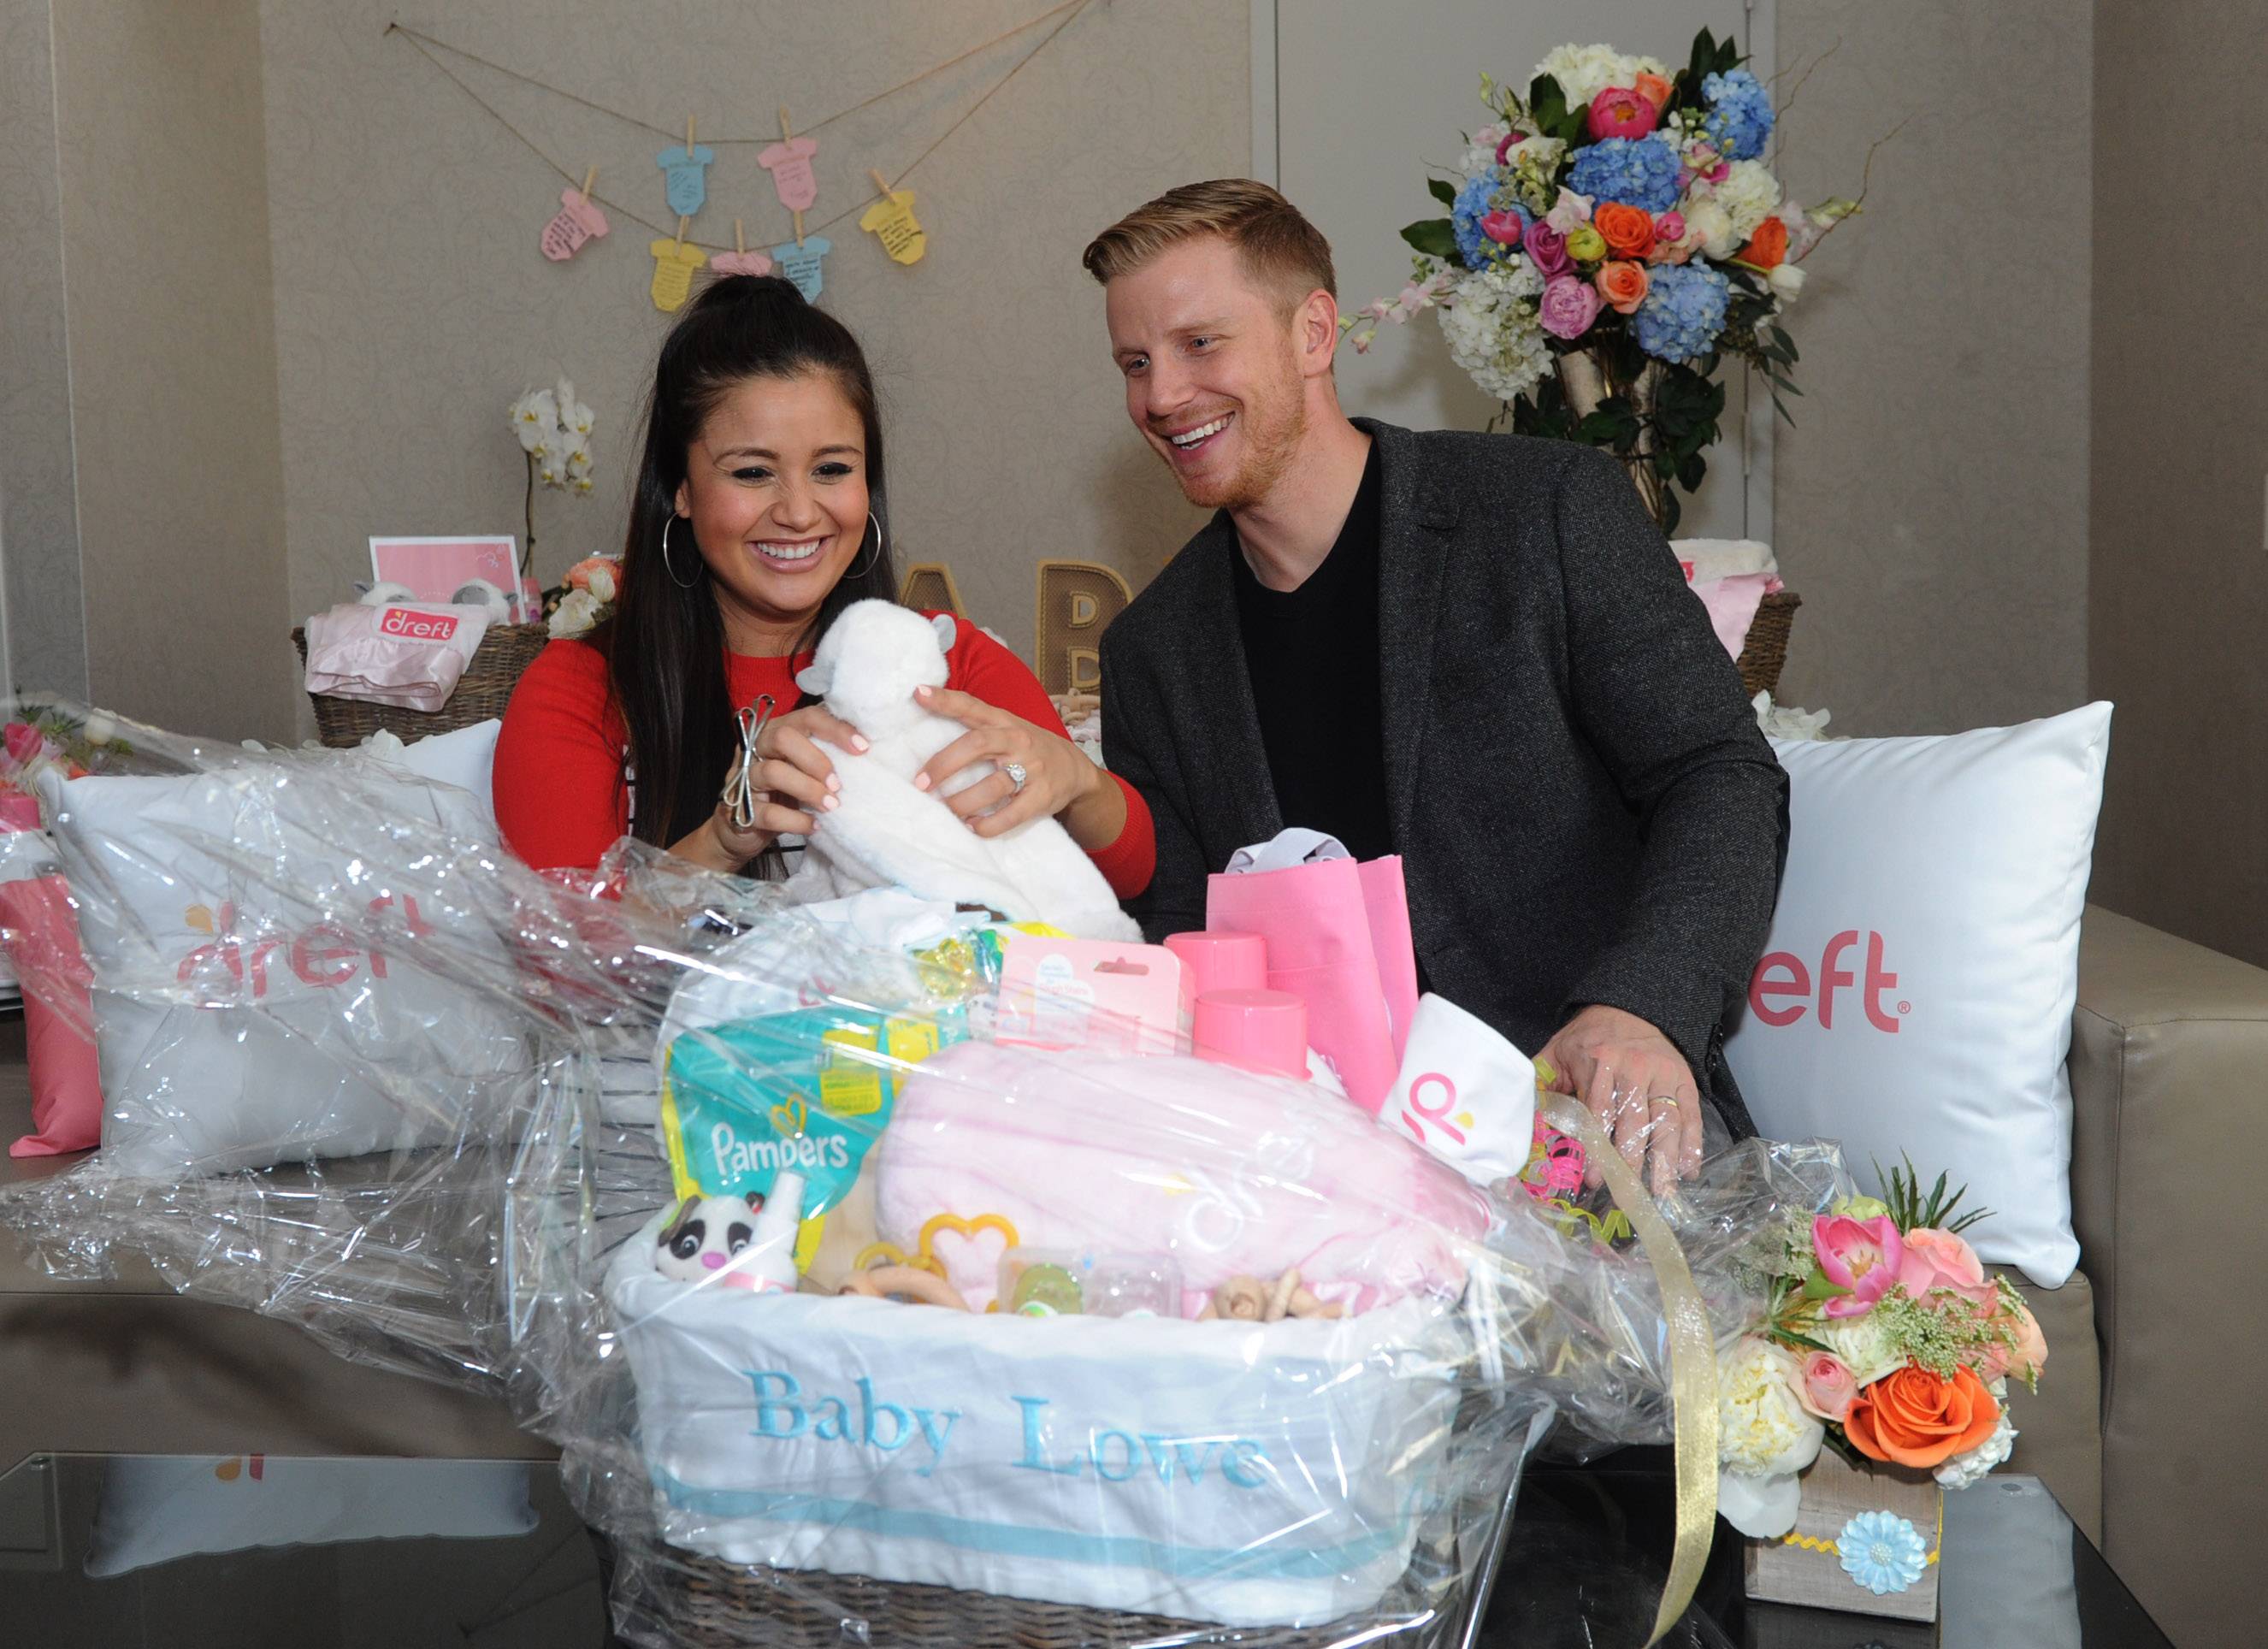 Reality TV couple Sean and Catherine Lowe celebrate their pregnancy at the Dreft Loads of Love baby shower, Wednesday, April 27, 2016, in New York. Visit Dreft.com and the brands social channels for more information about the couples parenting journey. (Diane Bondareff/Invision for Dreft/AP Images)